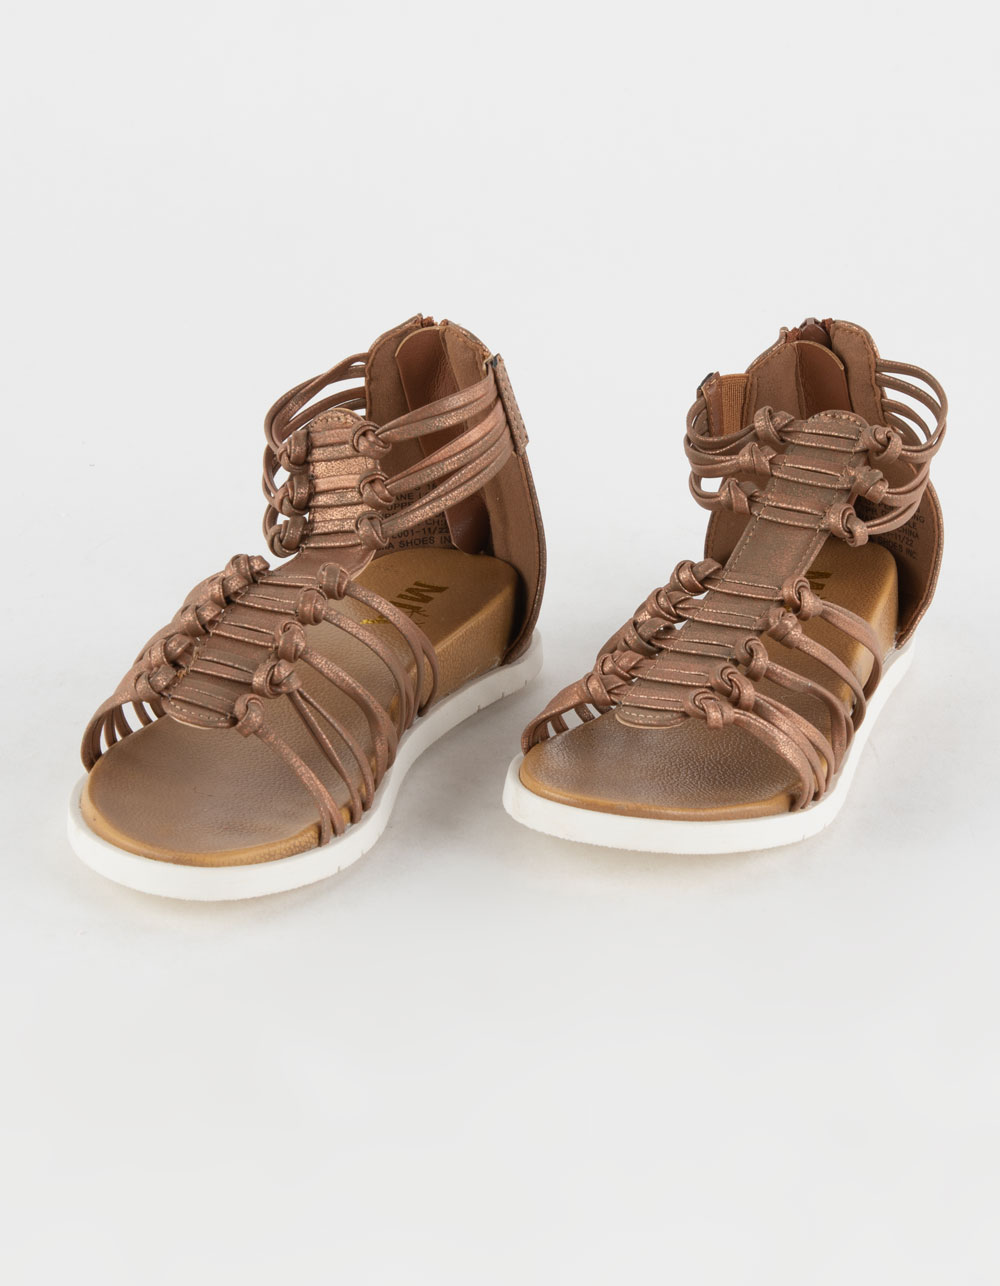 Cute Shoes for Girls | Tillys